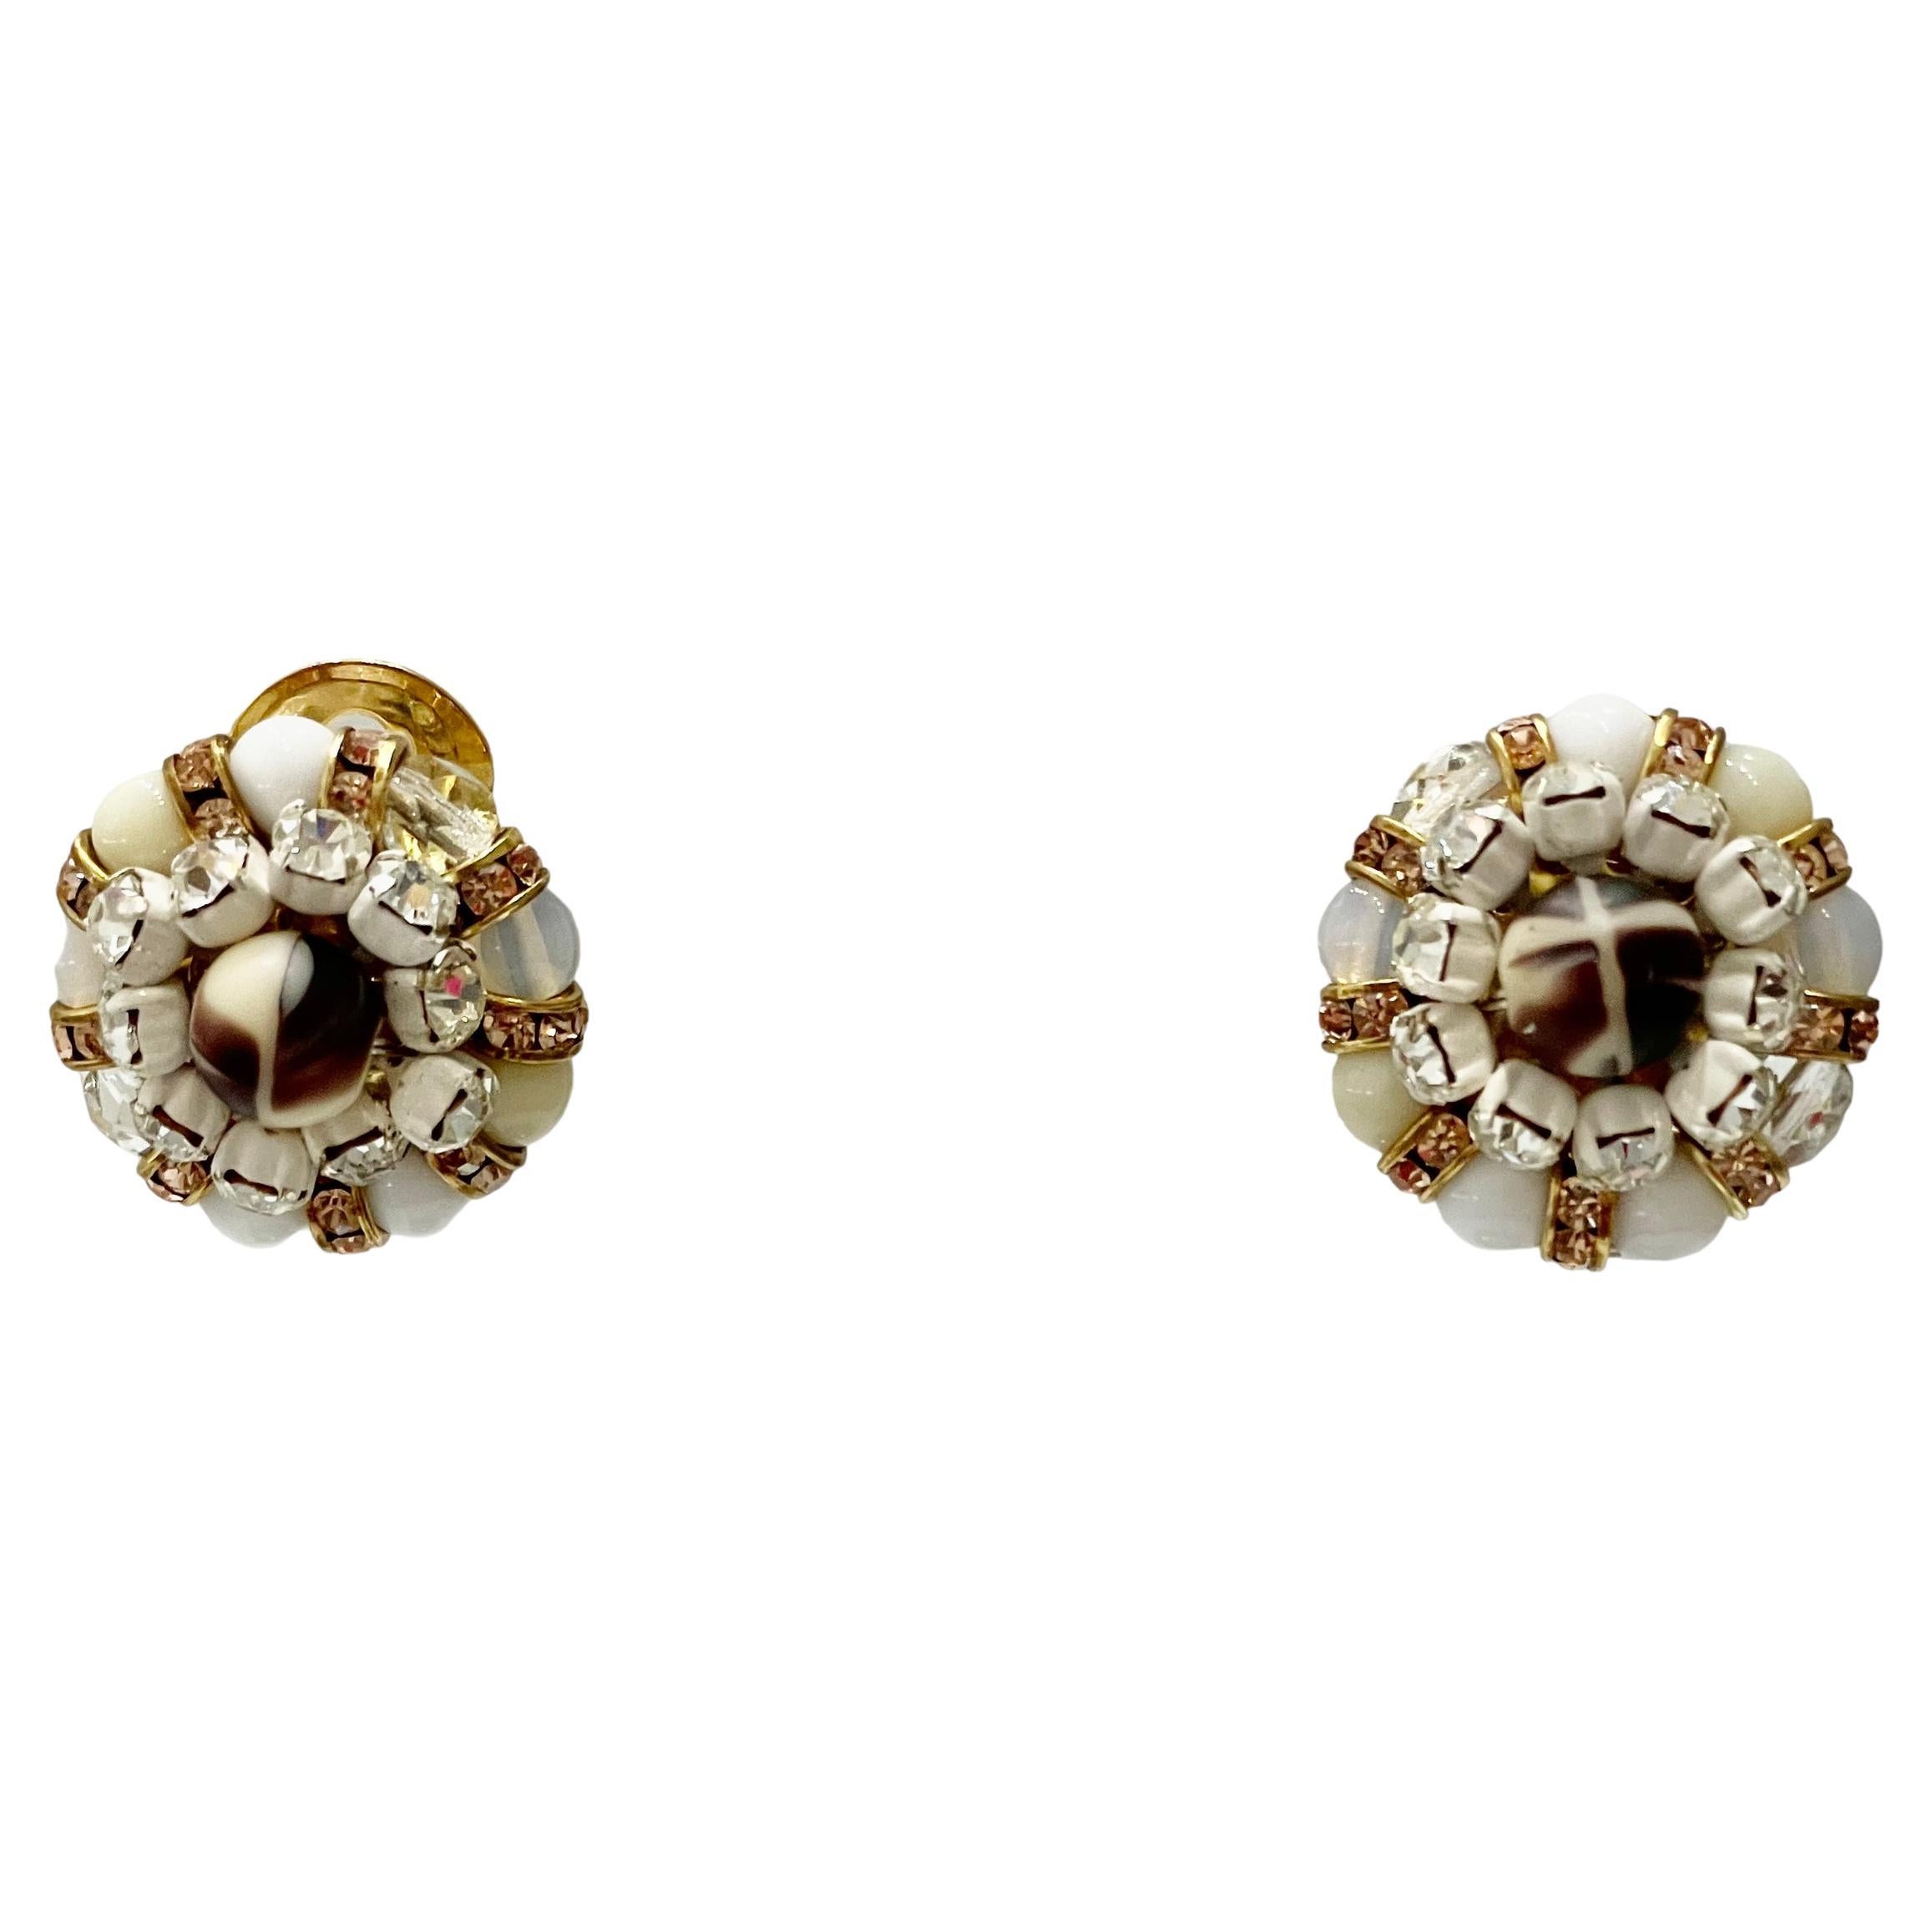 Francoise Montague White and Gold Clip Earrings